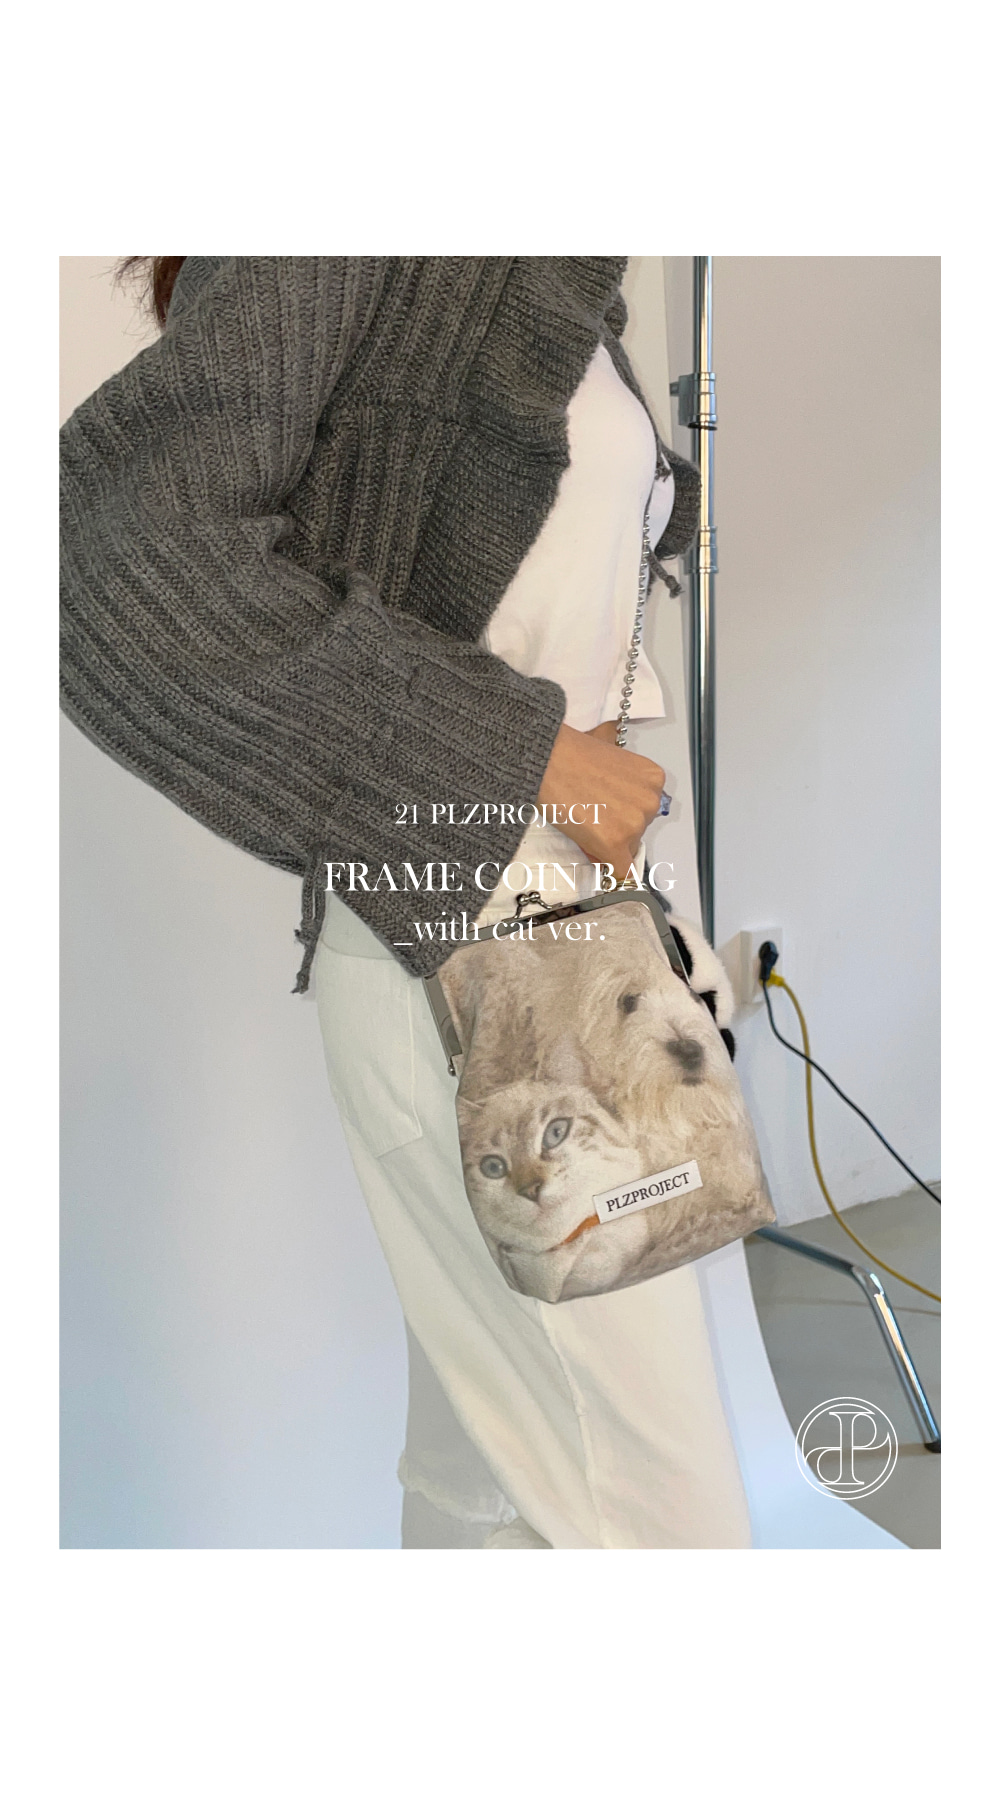 frame coin bag_with cat ver